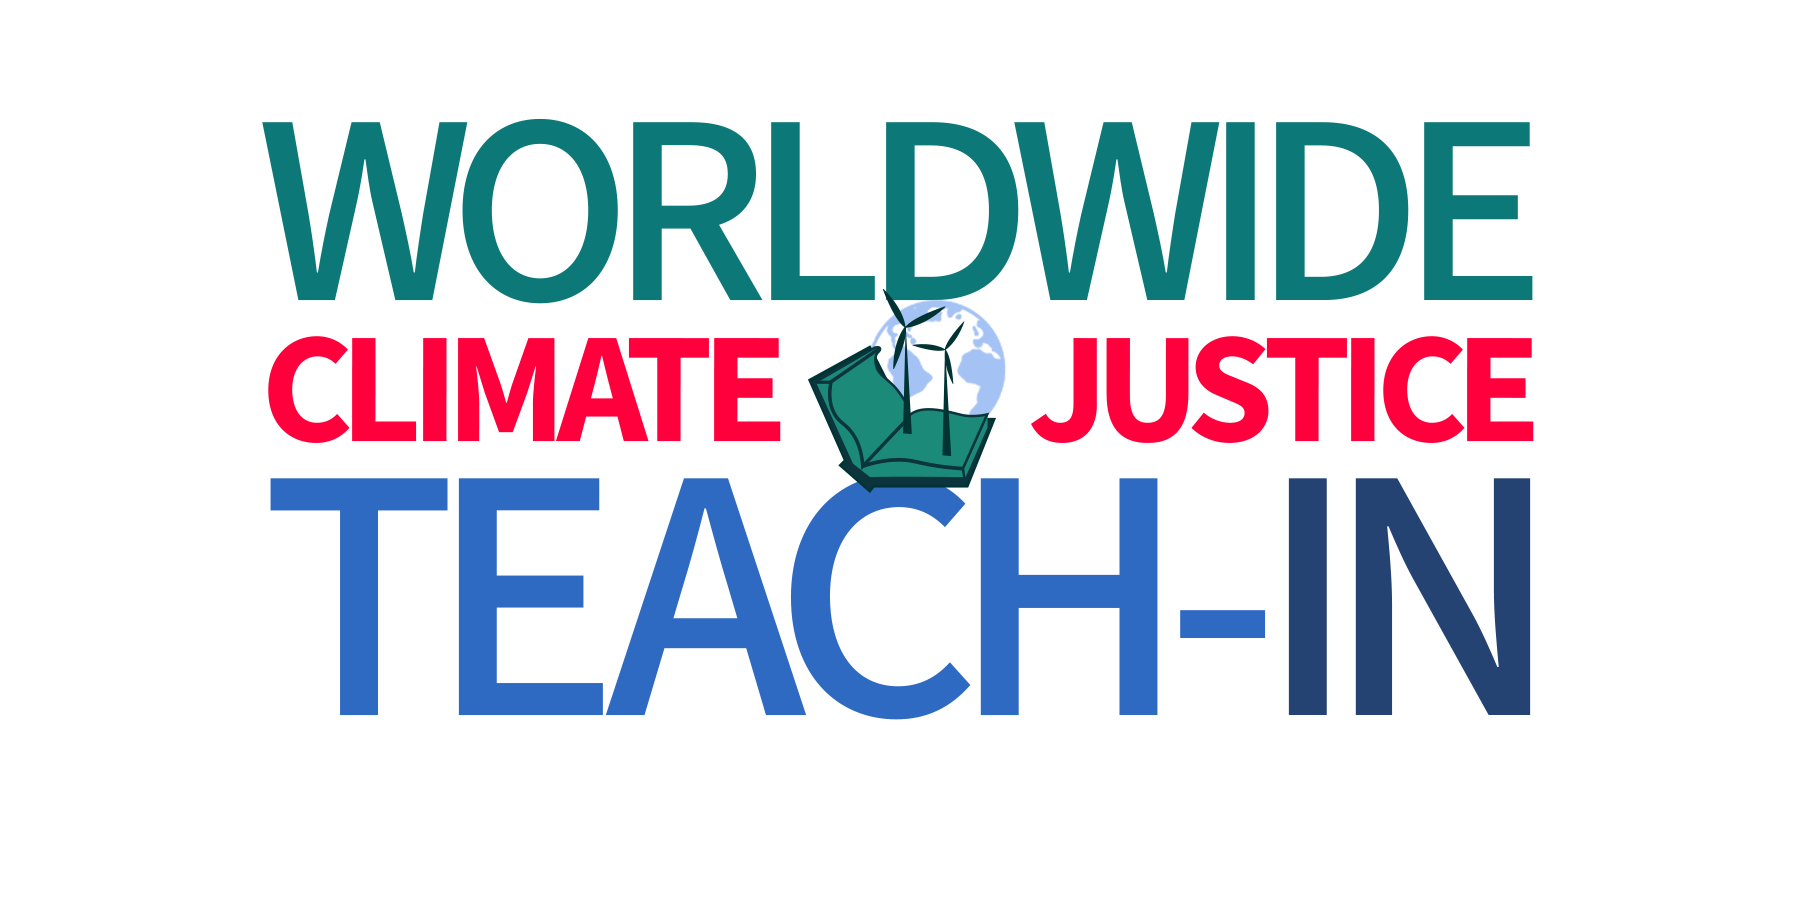 Worldwide Teach-in for climate justice logo